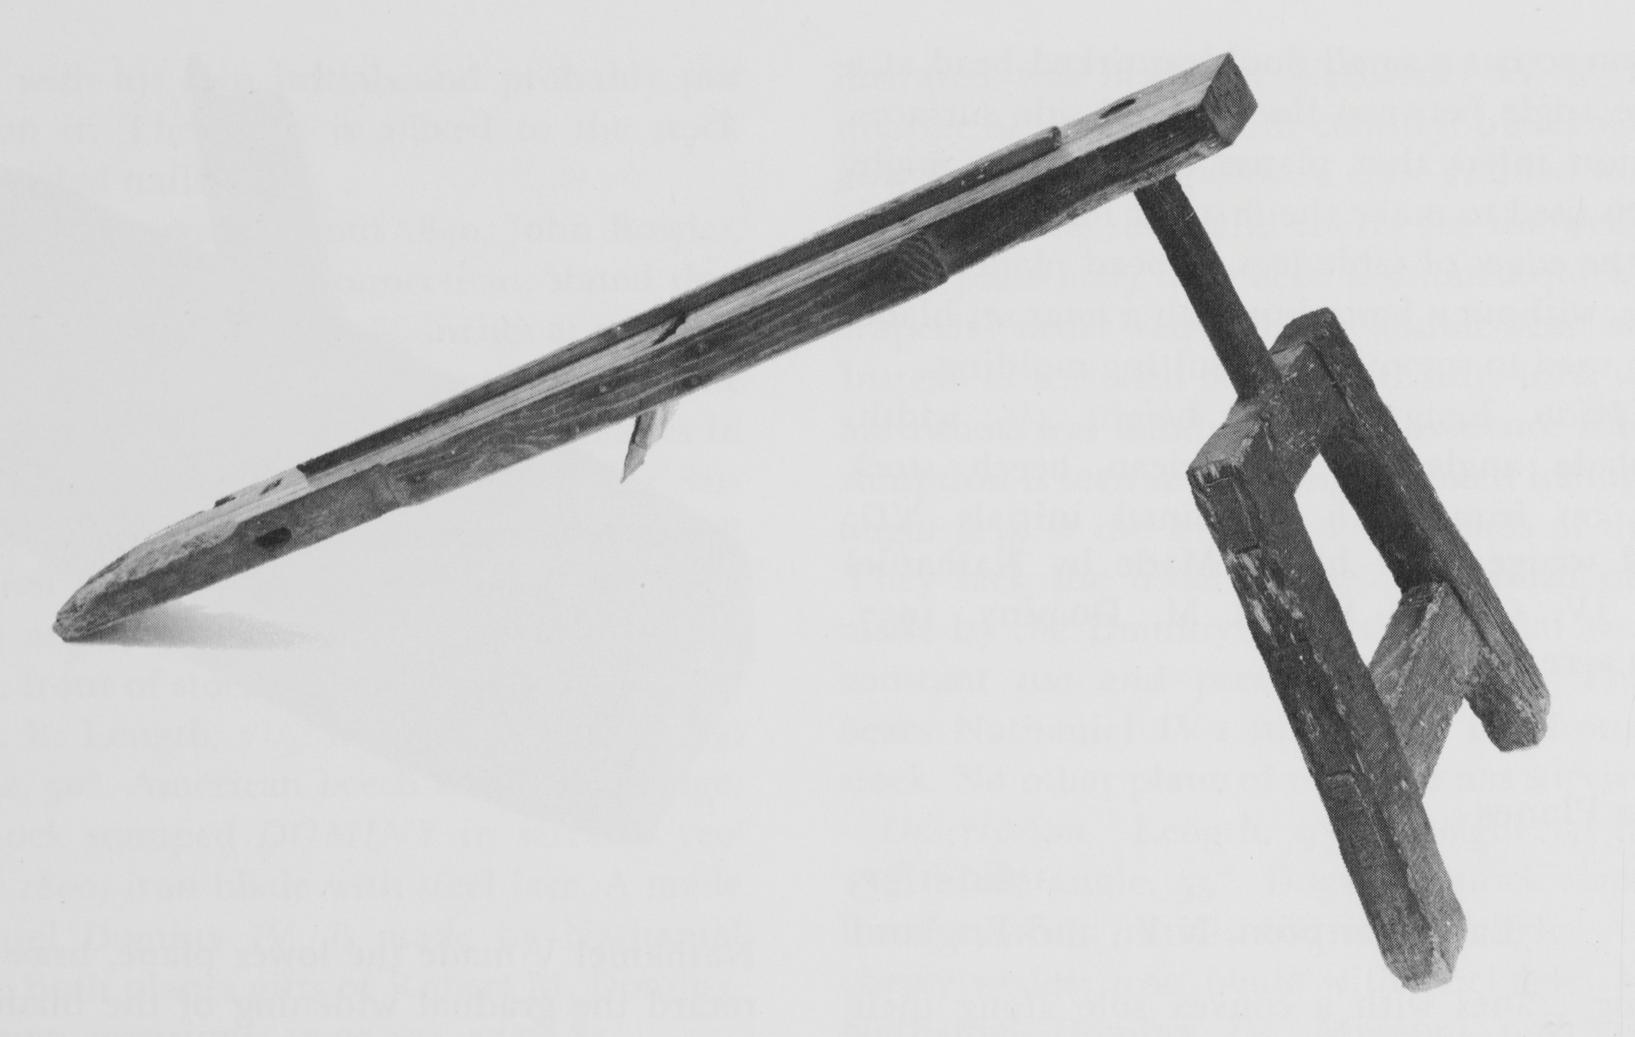 Black and white photograph of a cooper's jointer plane.